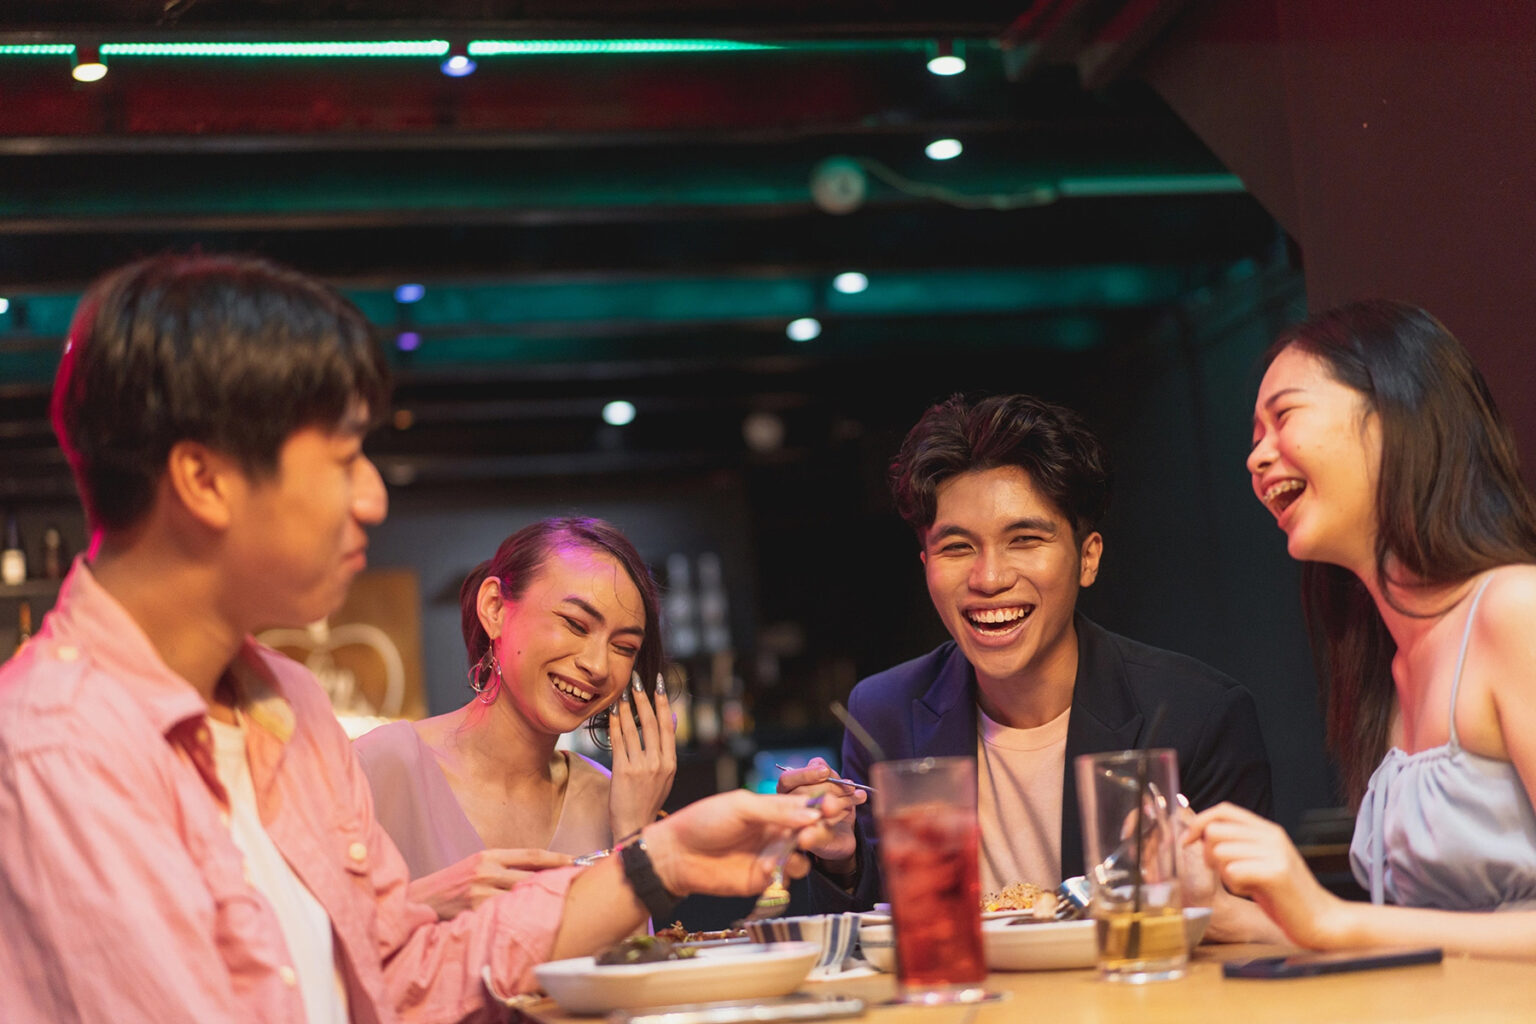 Group of friends laughing in a bar